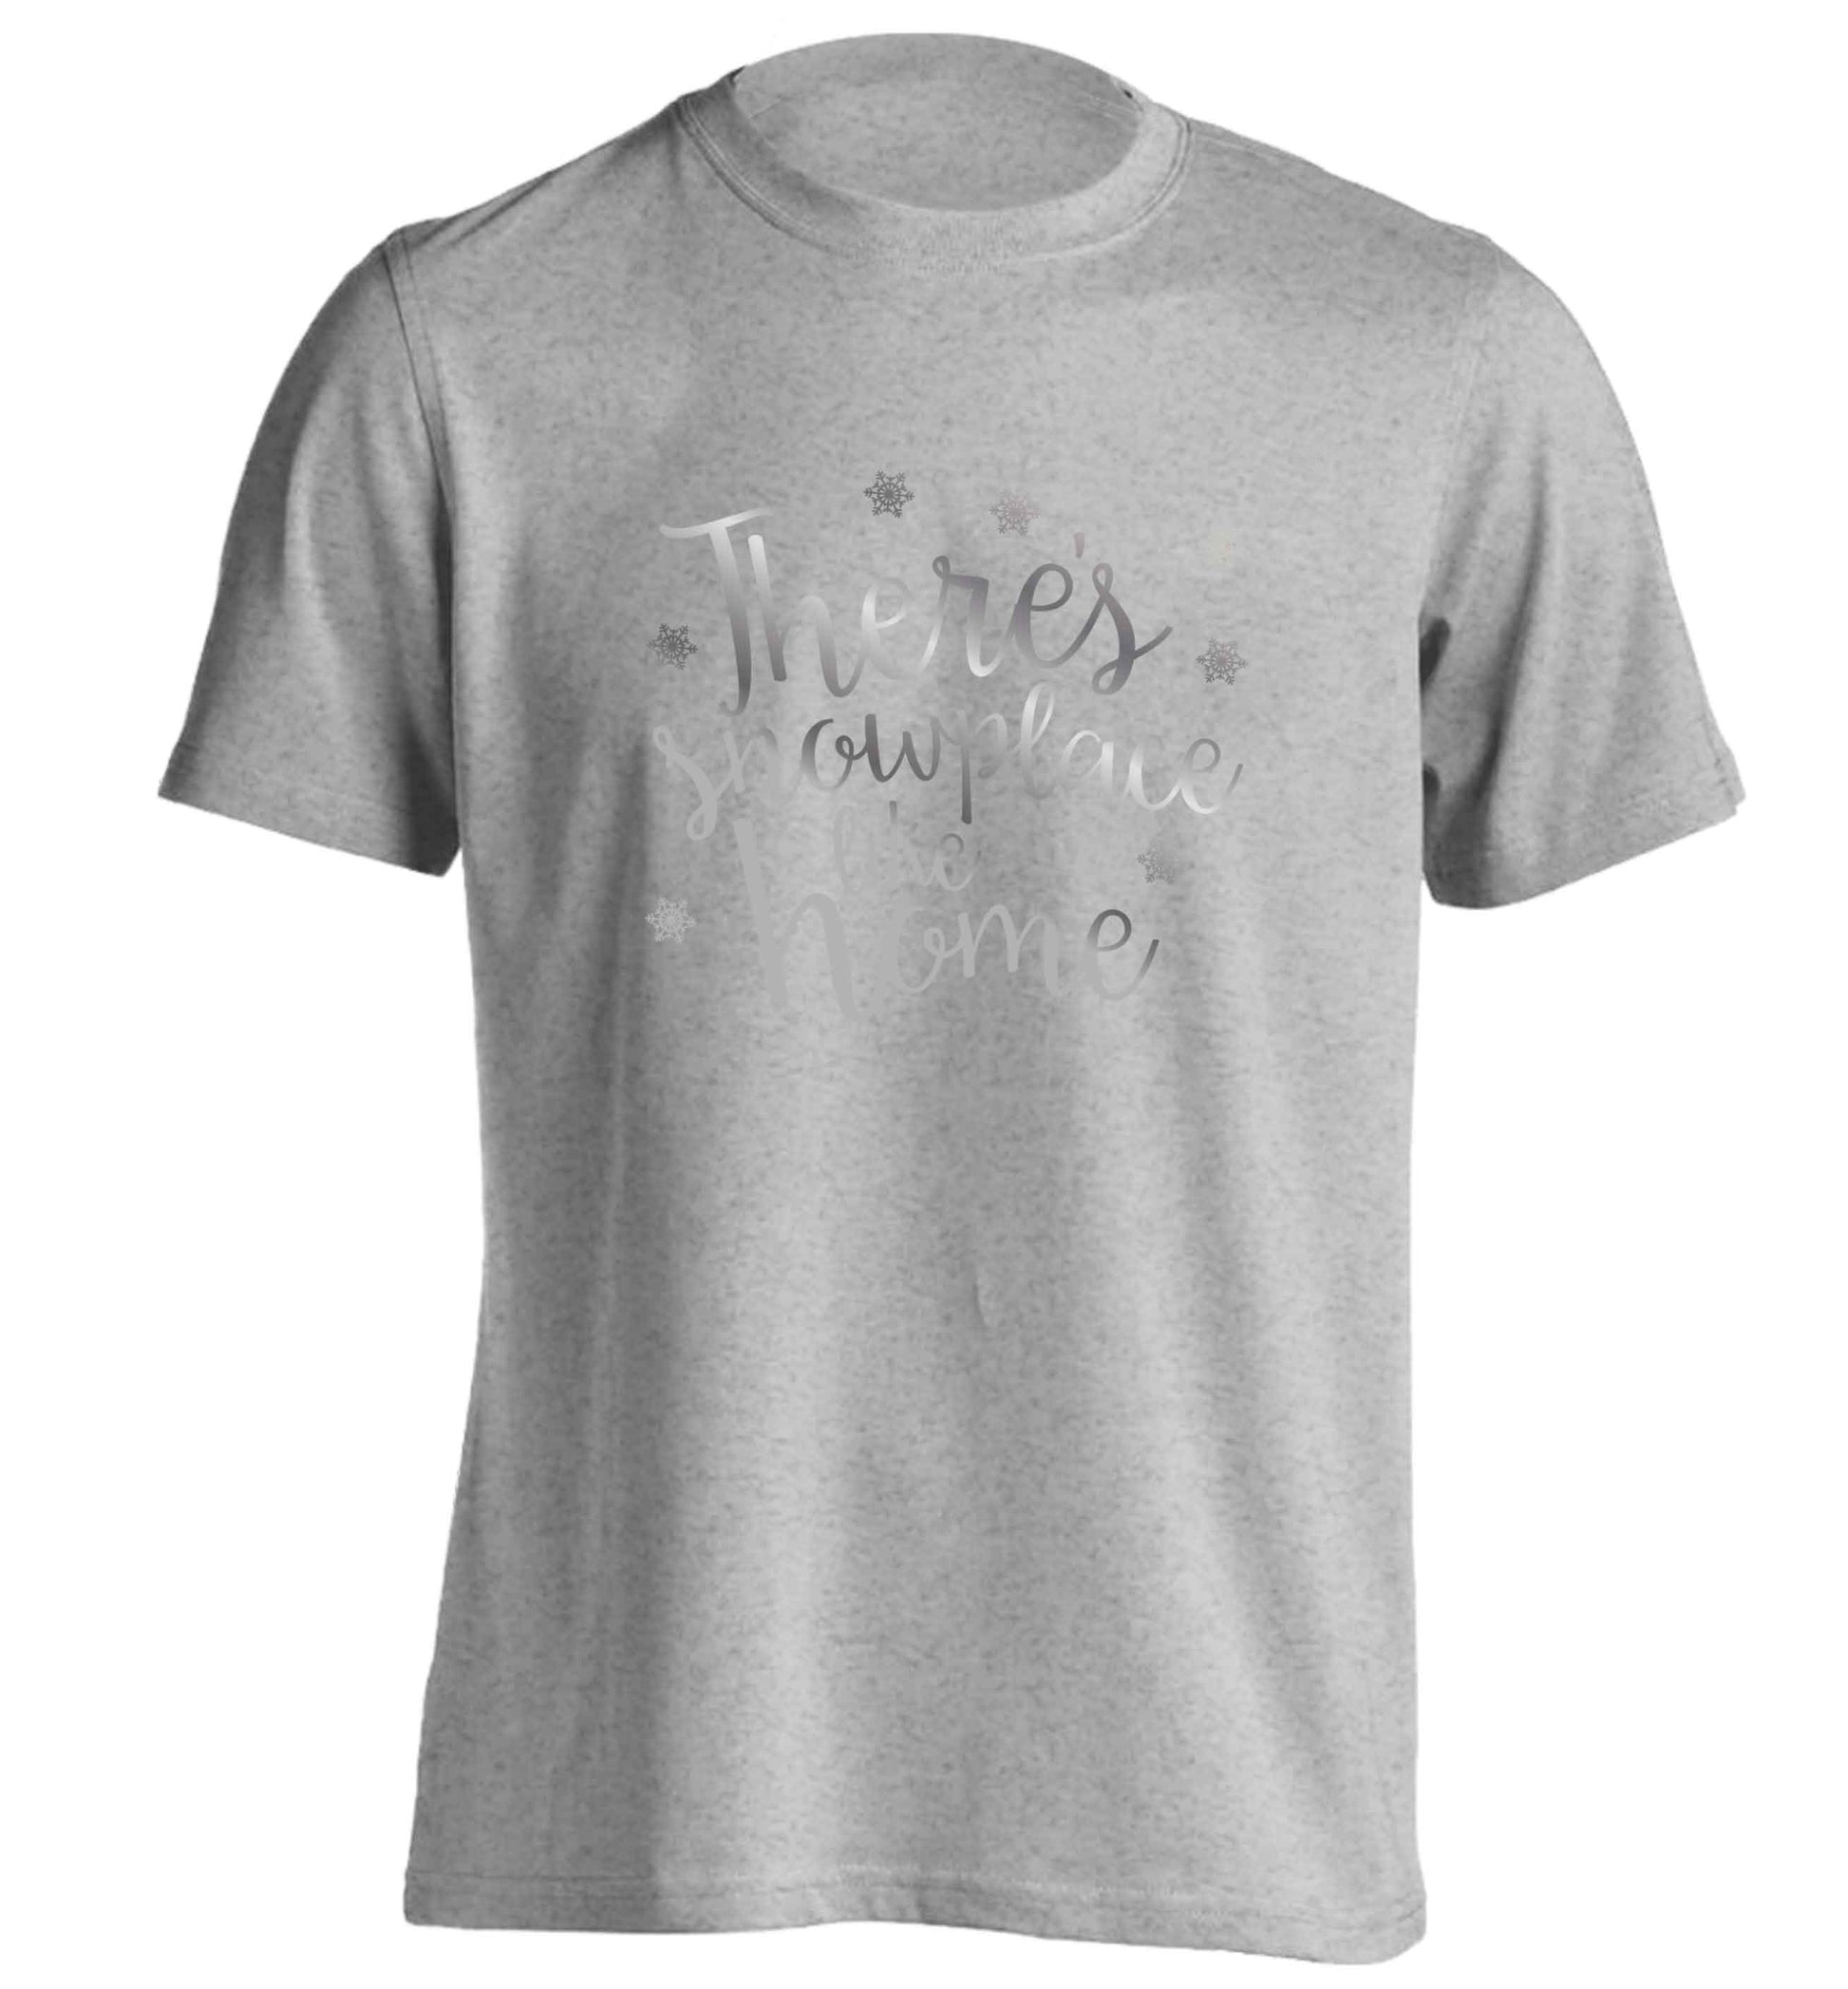 There's snowplace like home - metallic silver adults unisex grey Tshirt 2XL